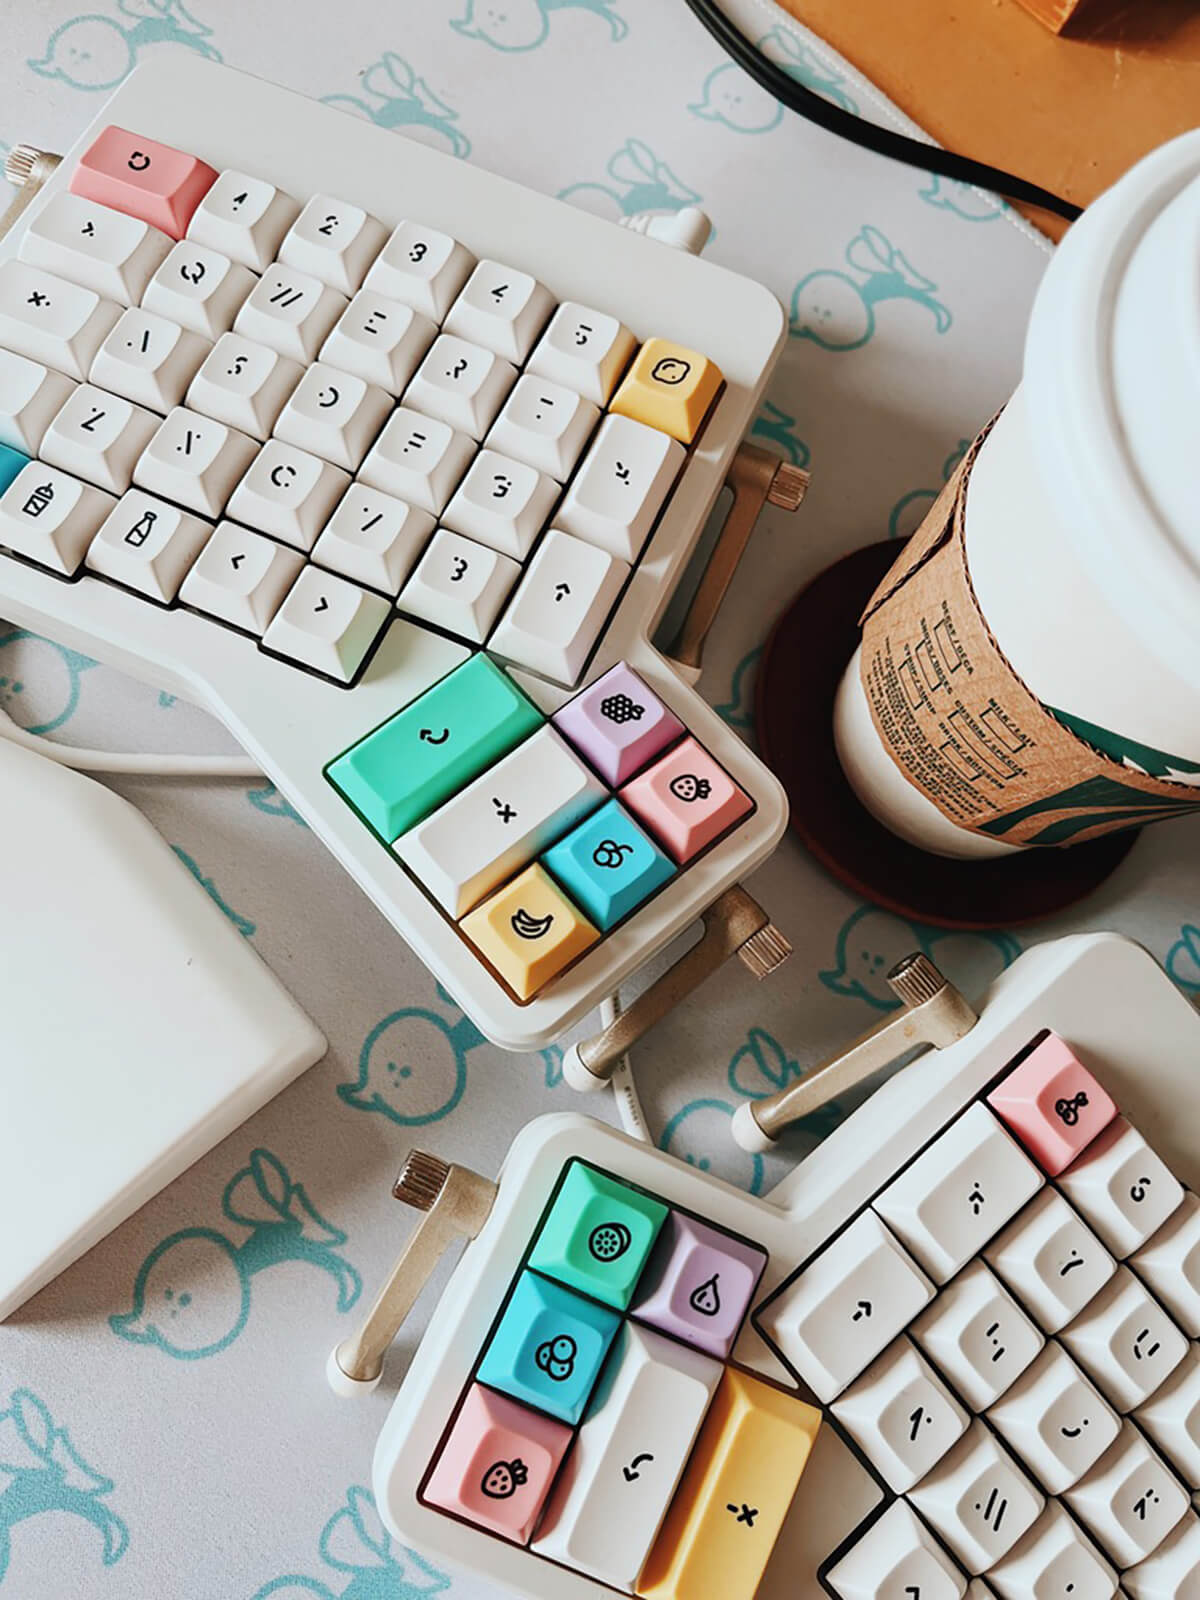 My white split keyboard and a Starbucks coffee cup on my desk.